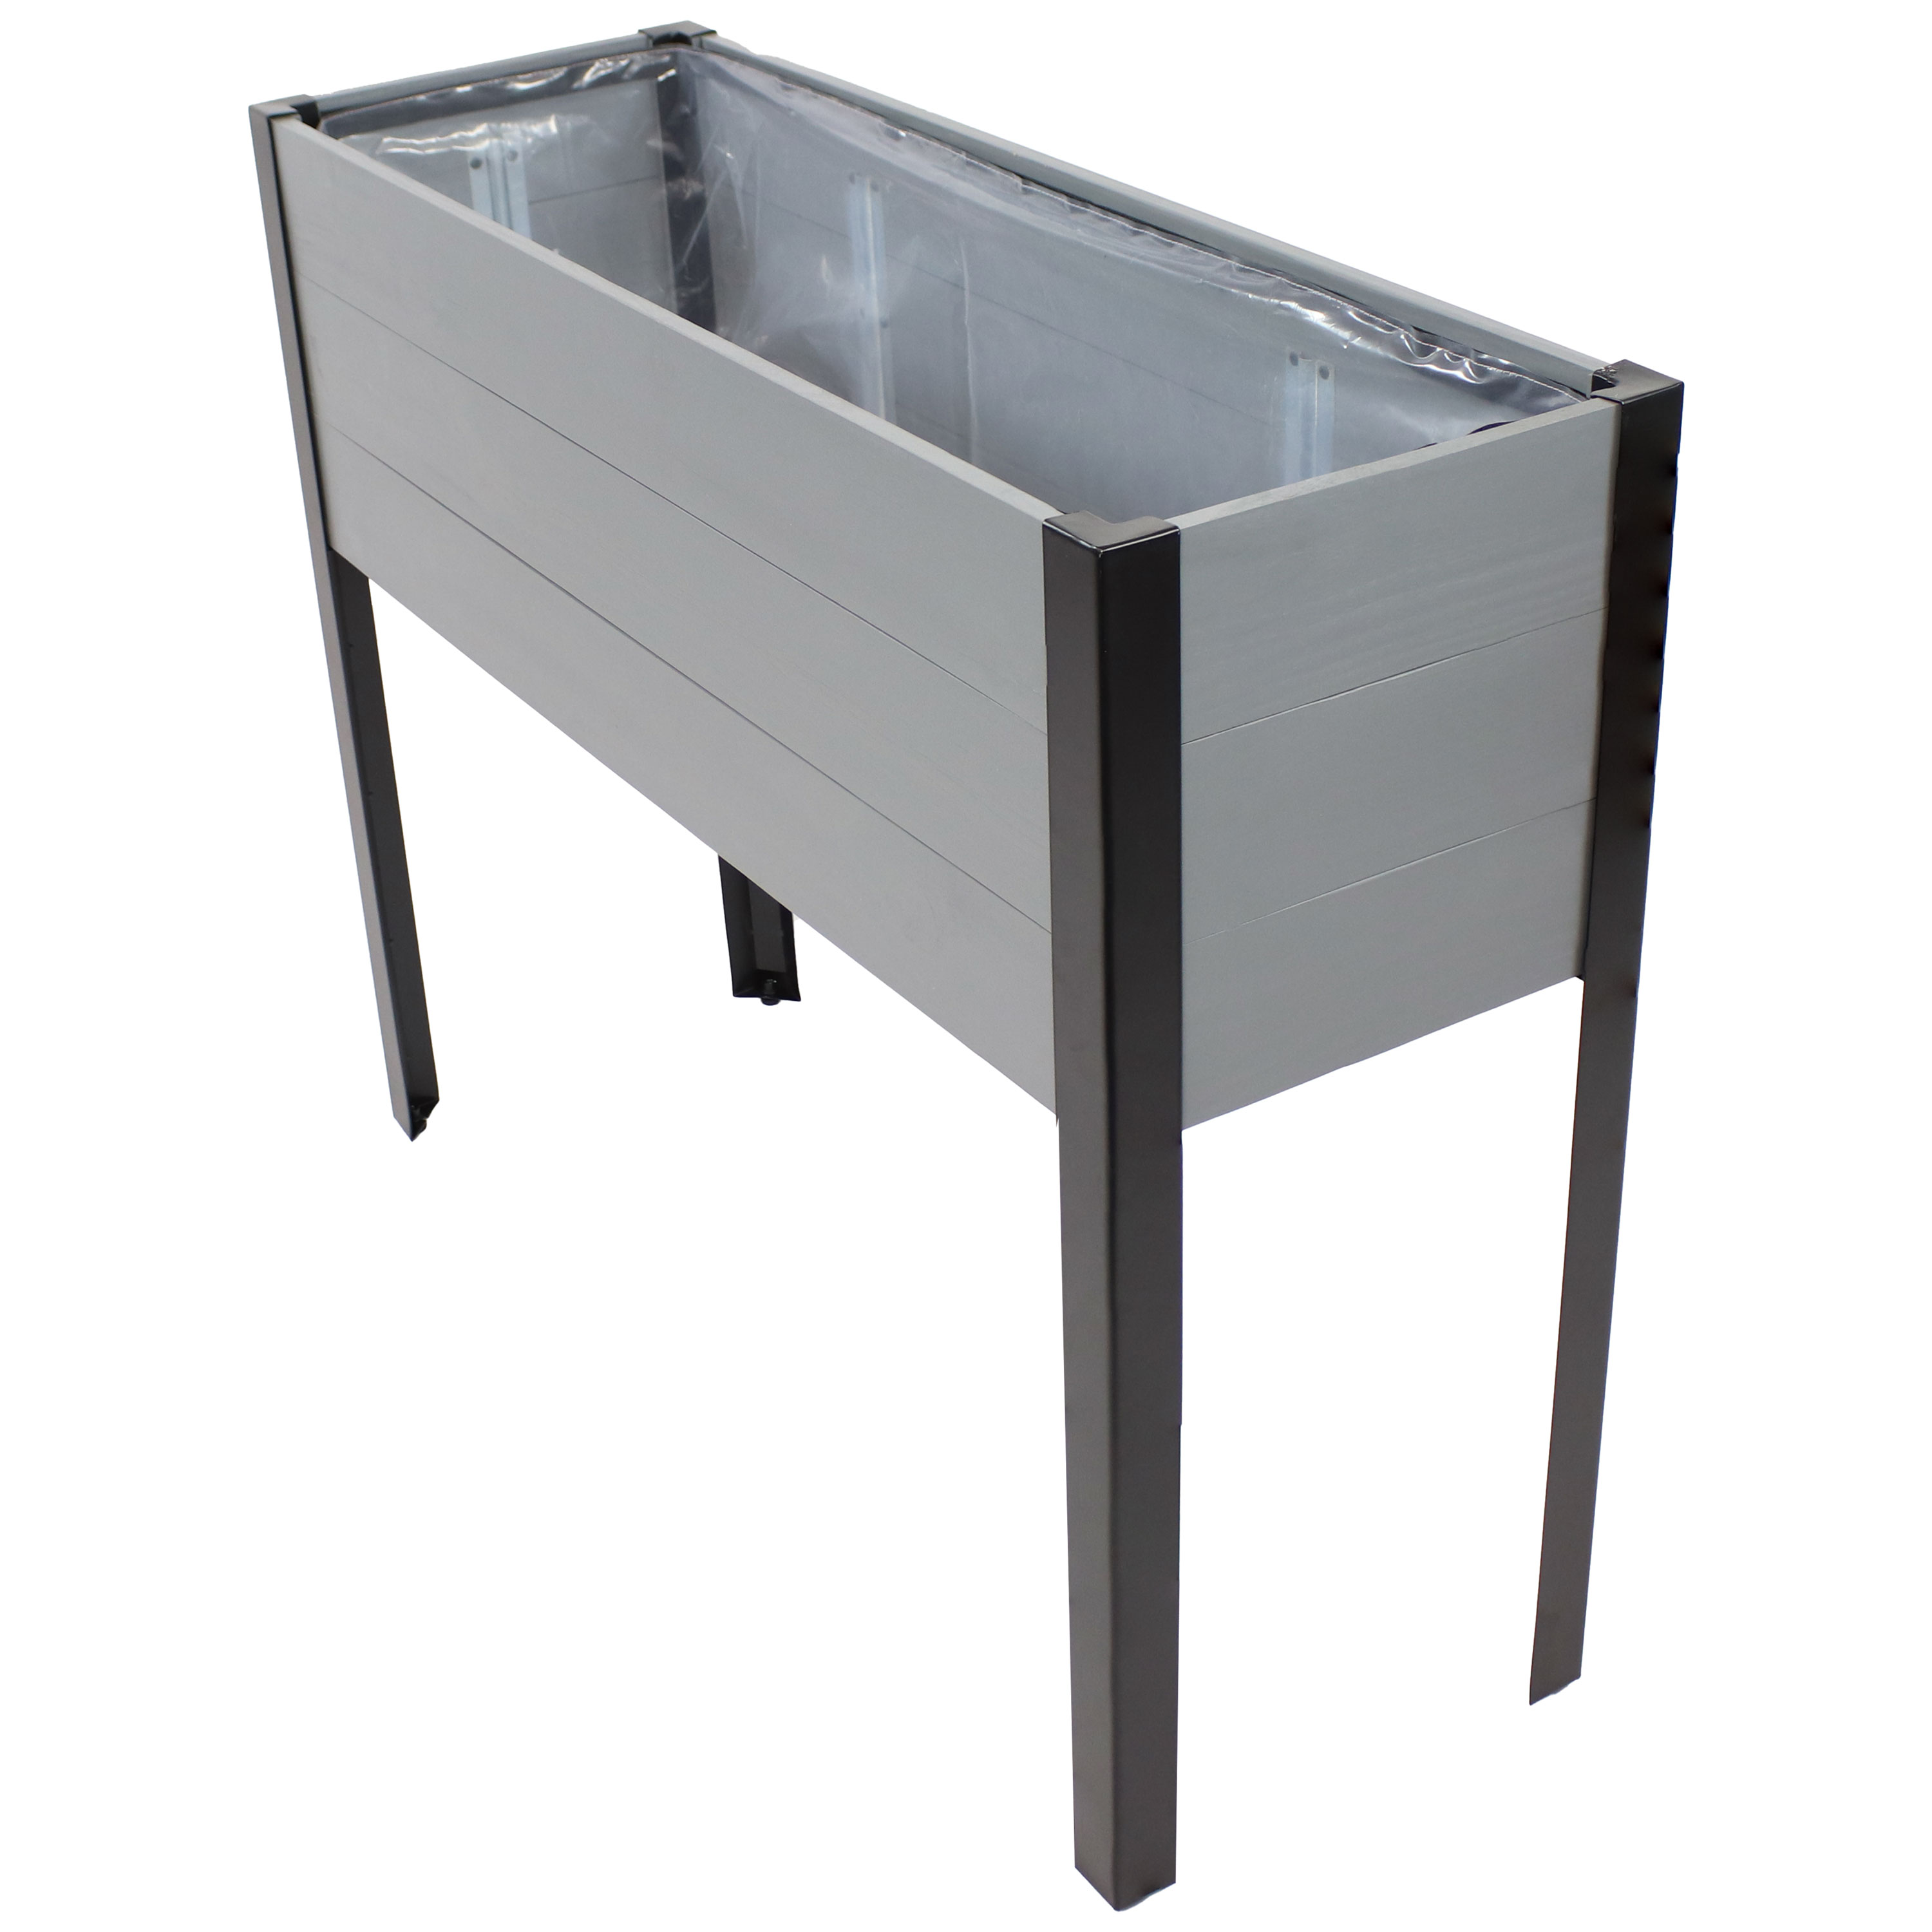 Acacia Raised Garden Bed with Removable Planter - Gray